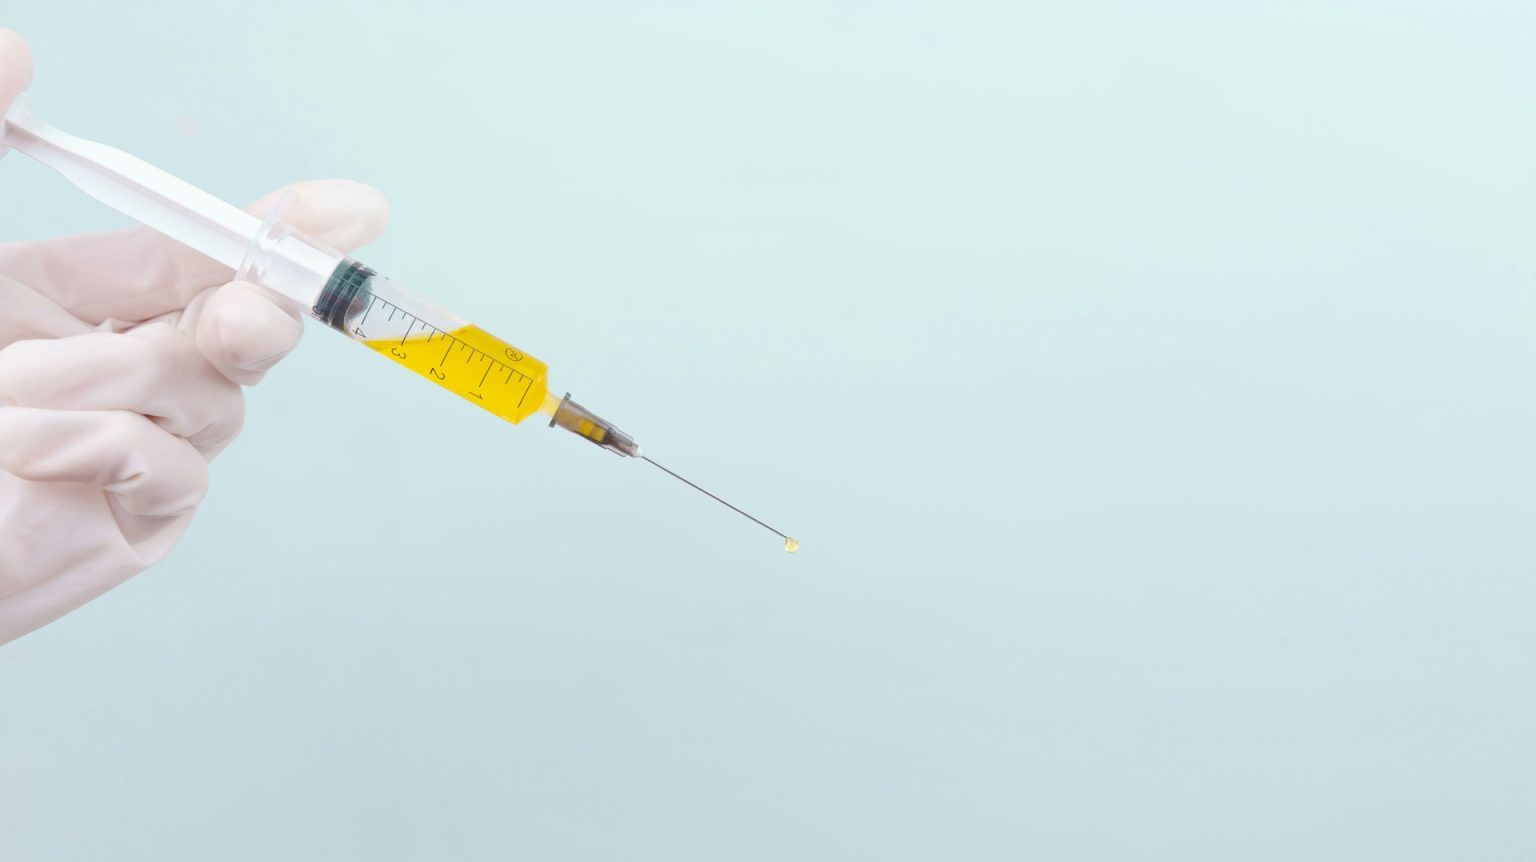 A hand in surgical gloves holding a syringe filled with yellow fluid against a light blue background.